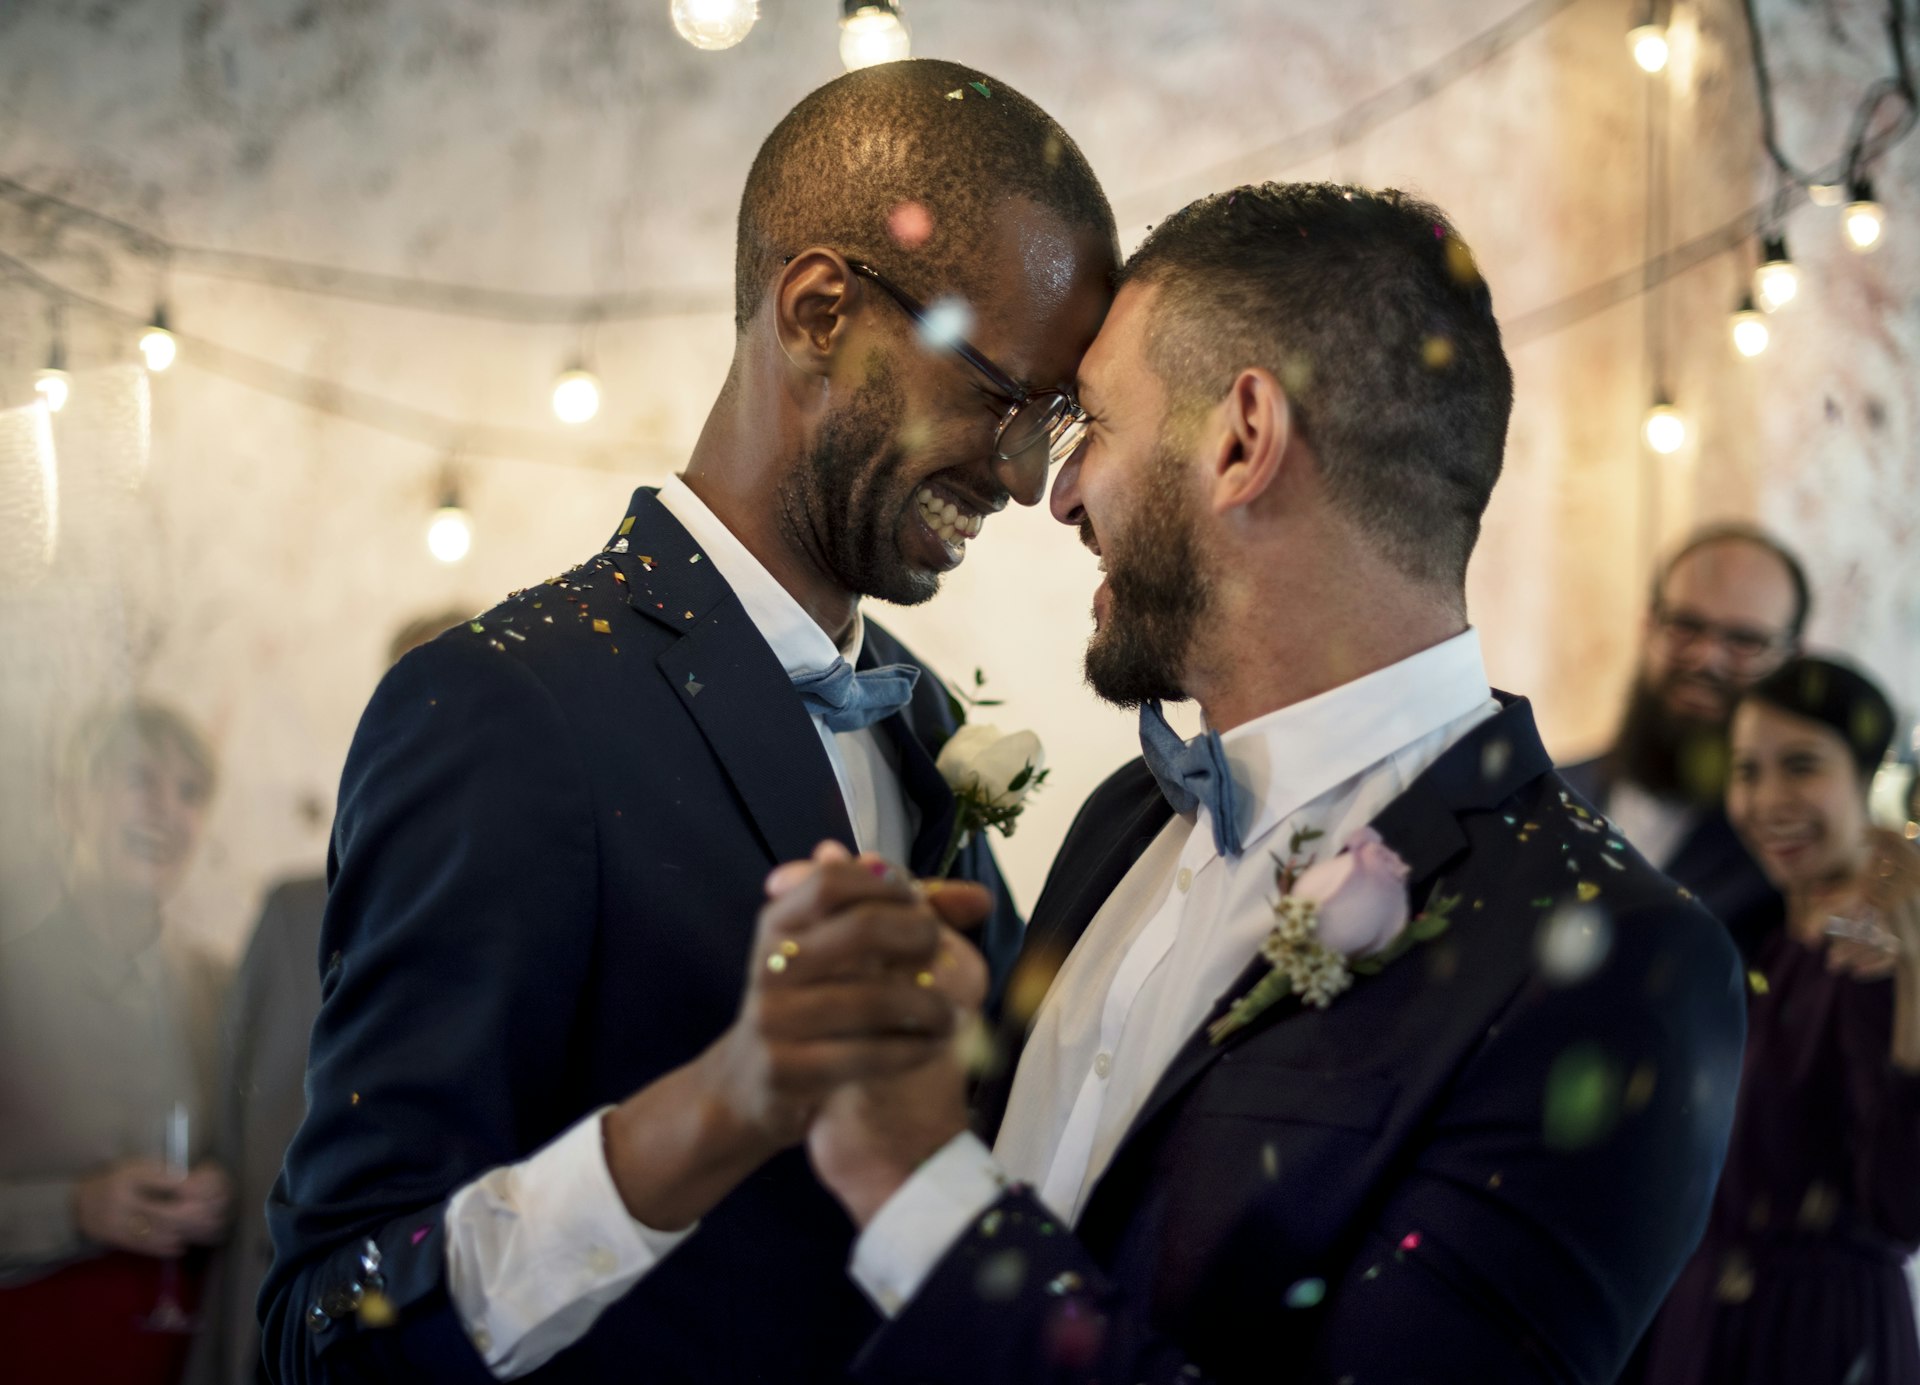 A newlywed gay couple celebrates their nuptials, now a possibility in Switzerland